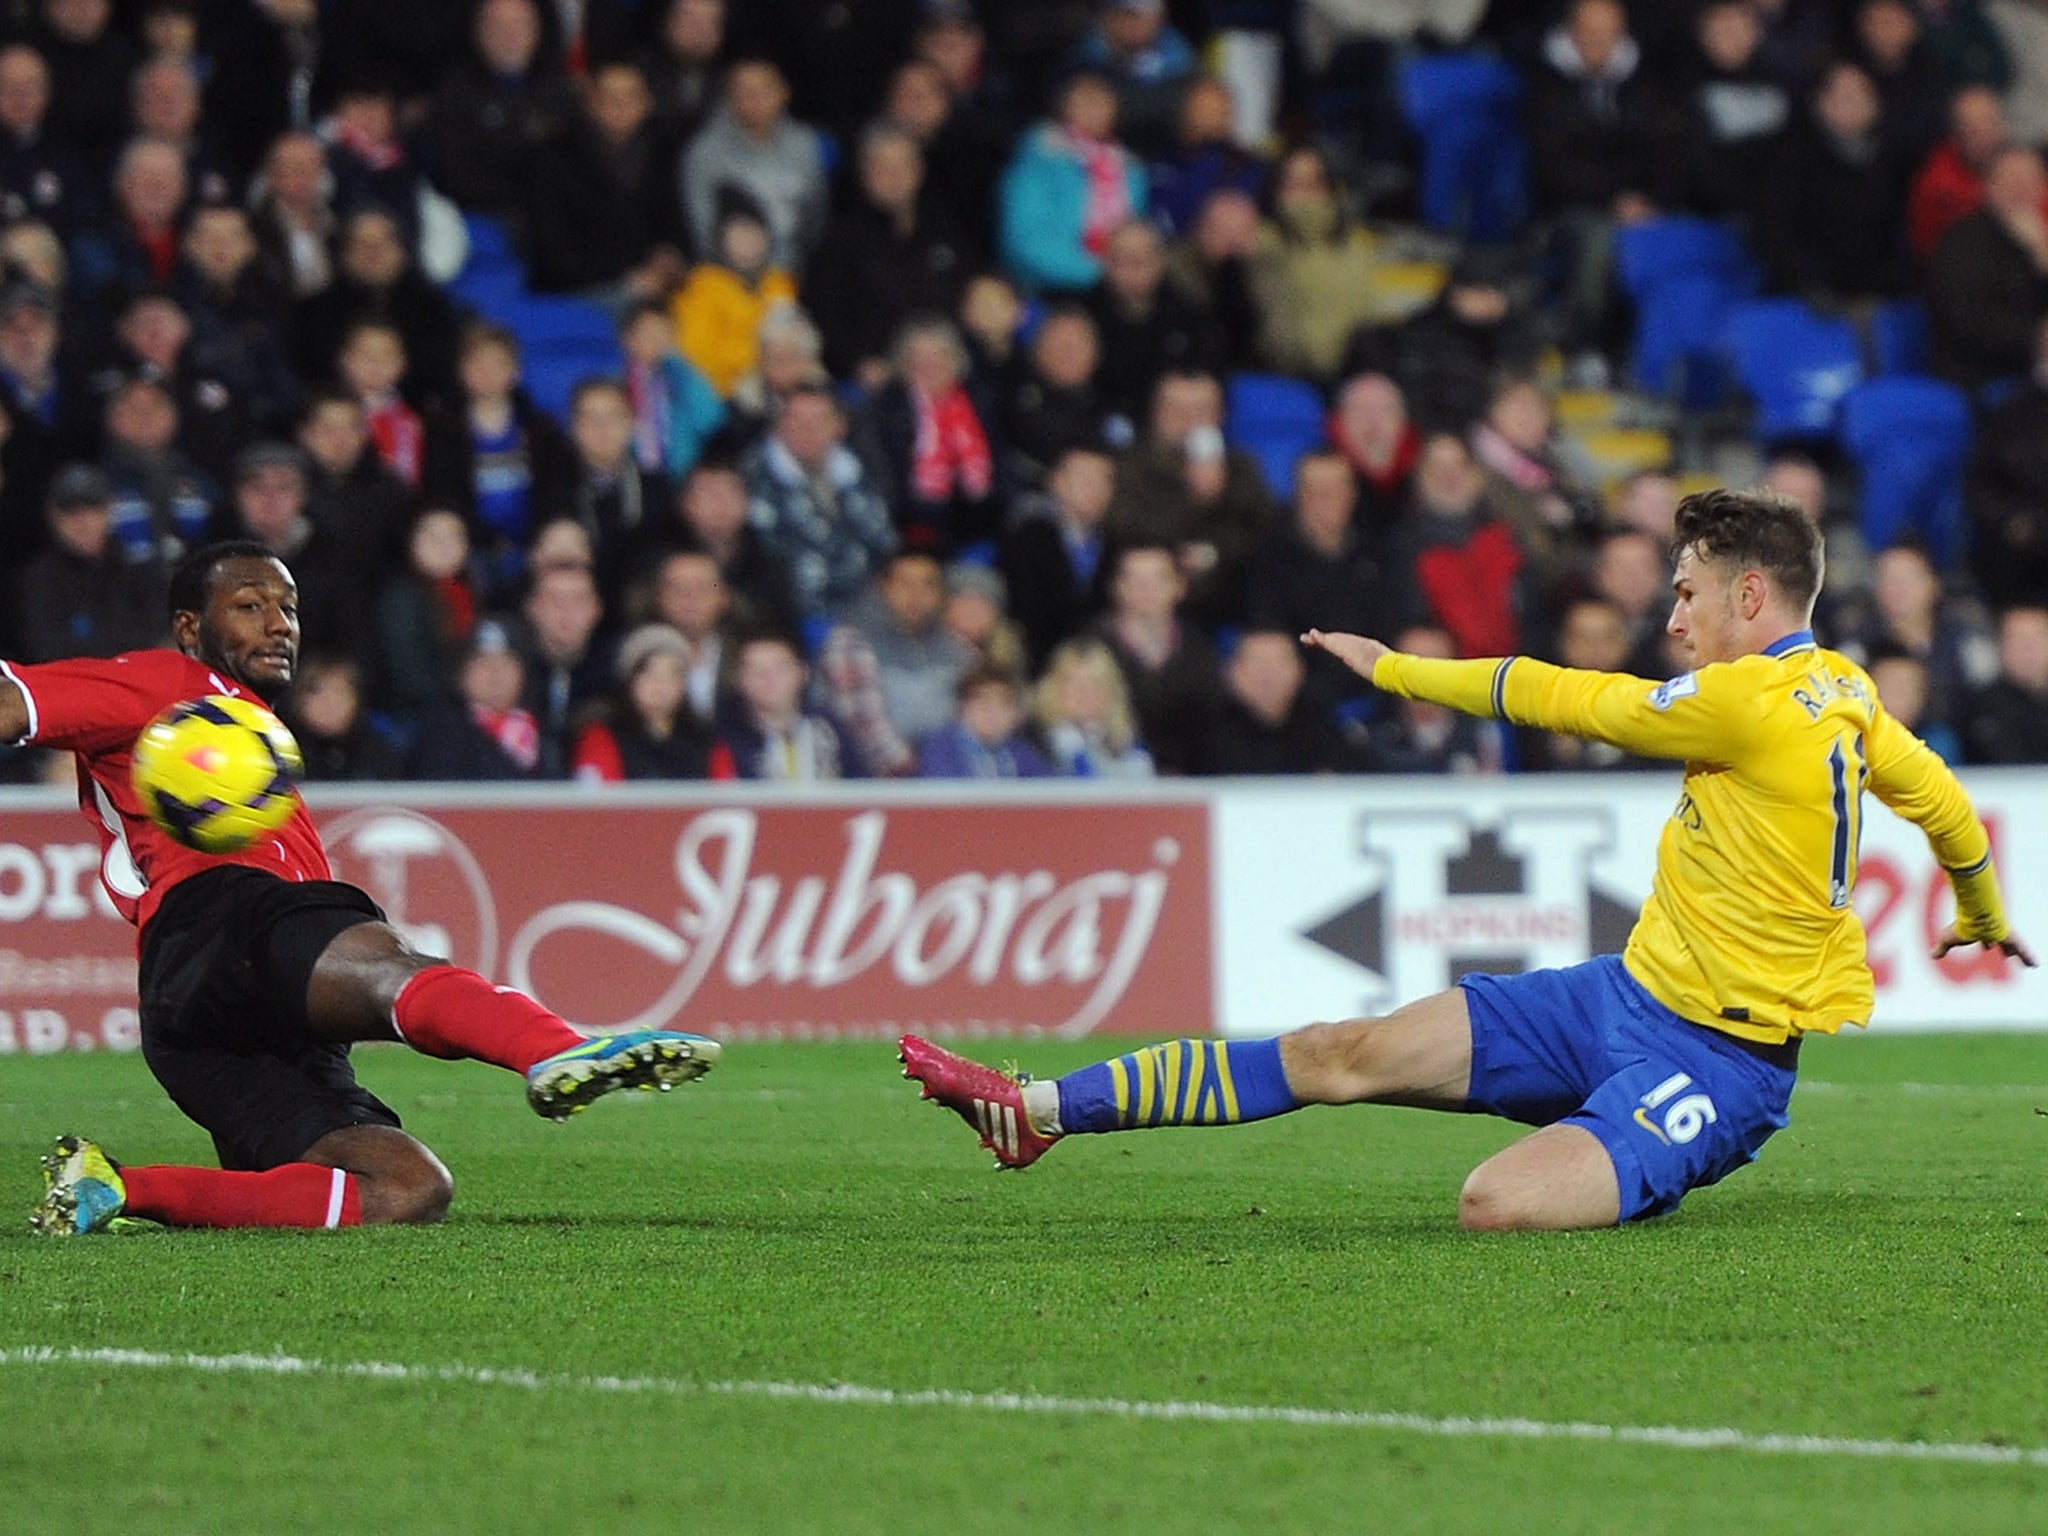 Aaron Ramsey slides in to score his second and Arsenal's third in injury time against Cardiff